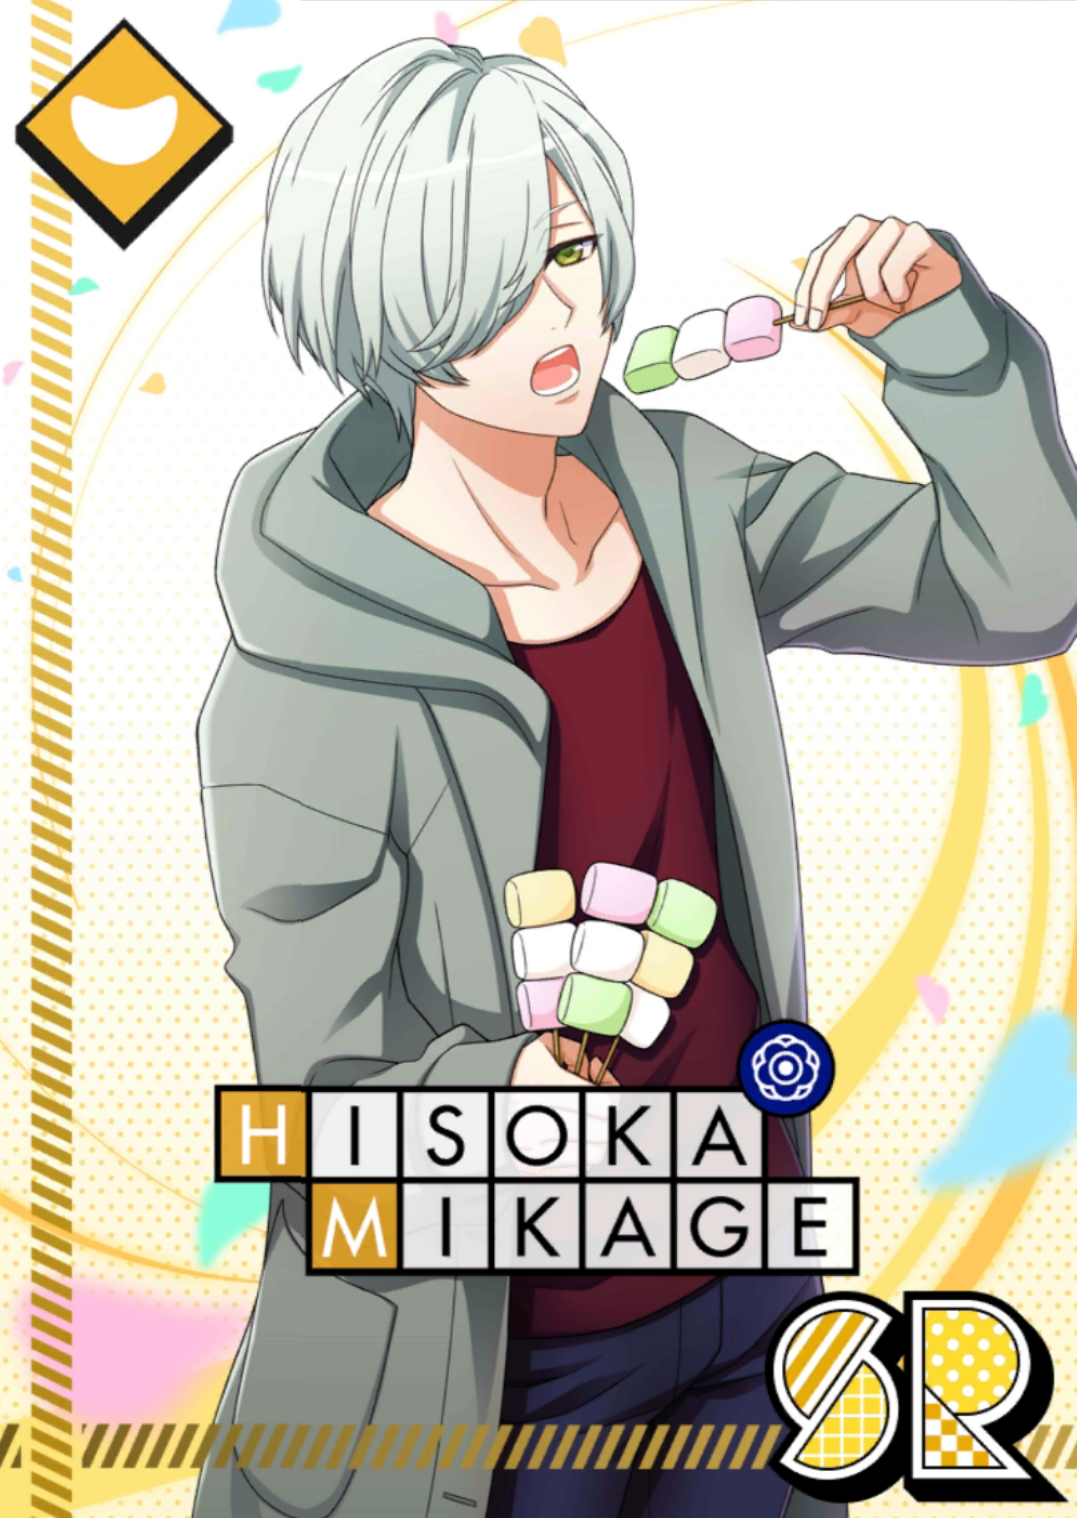 Hisoka Mikage SR Memories Among the Blossoms unbloomed.png